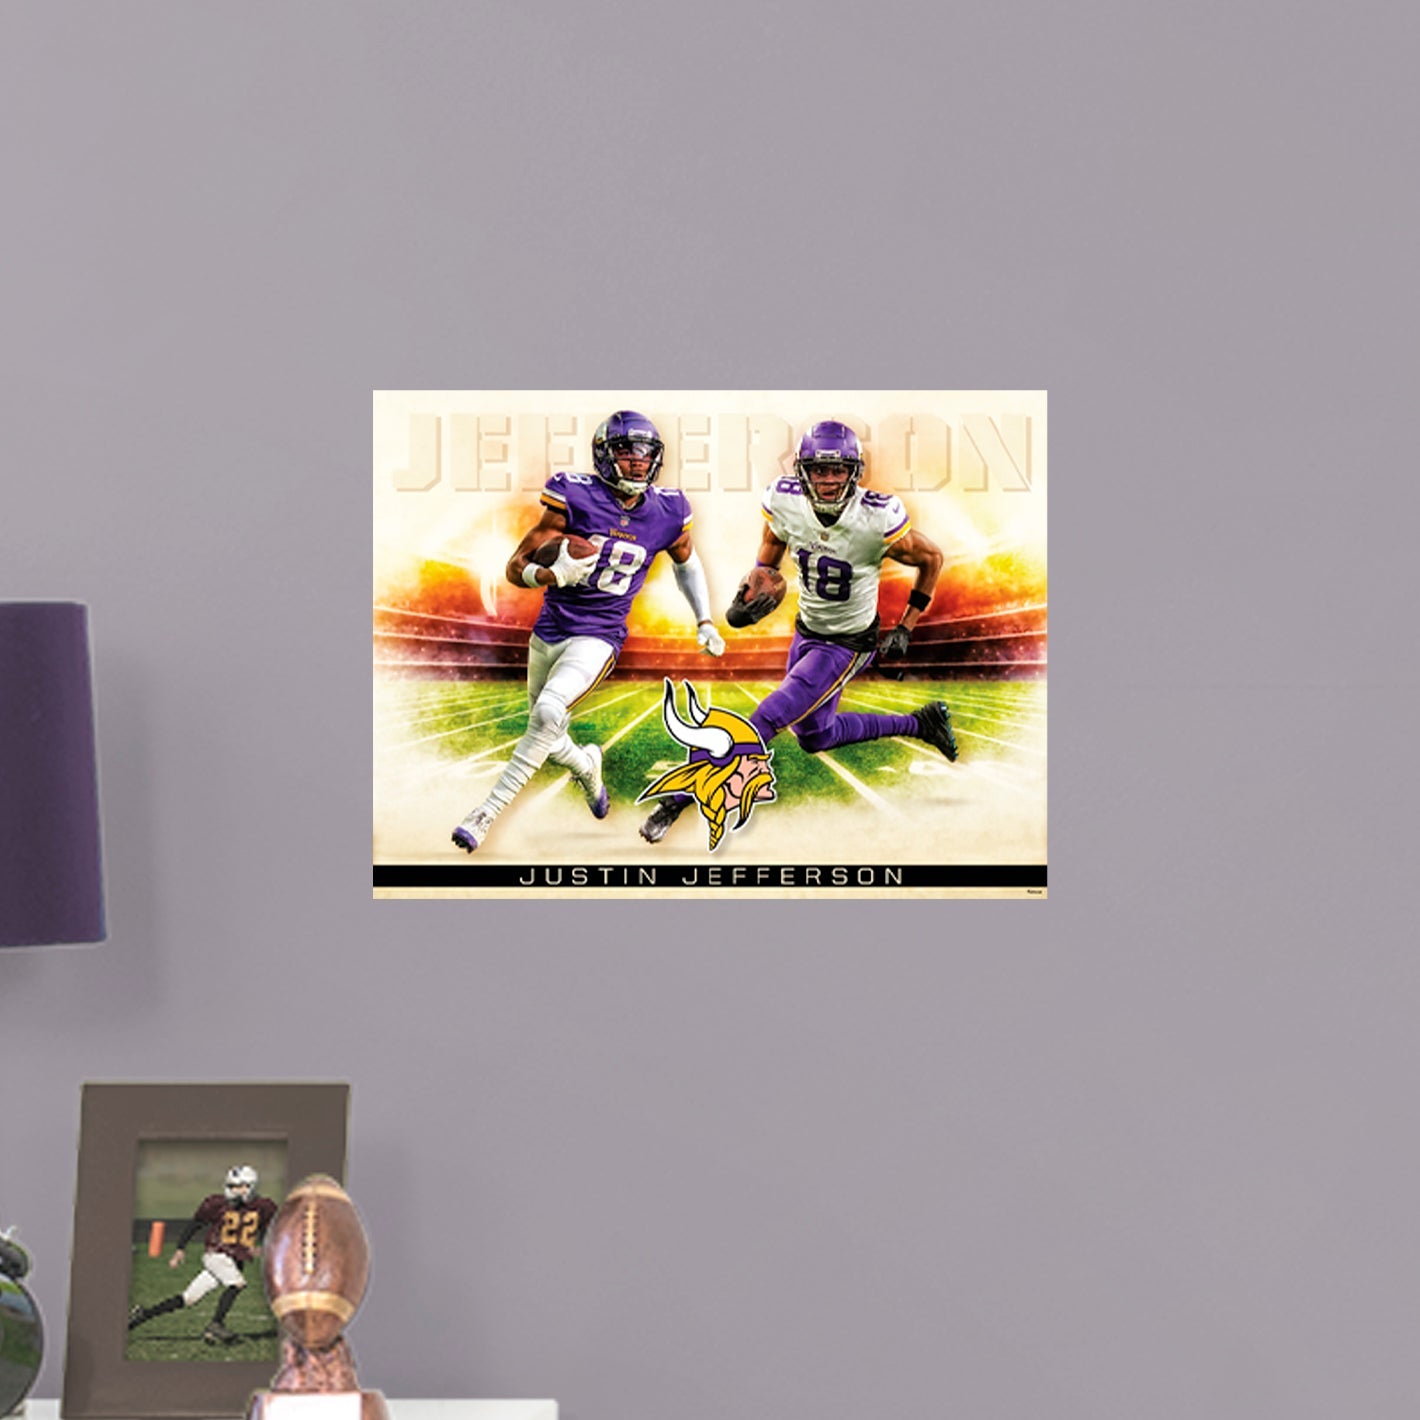 Minnesota Vikings: Justin Jefferson Icon Poster - Officially Licensed NFL Removable Adhesive Decal